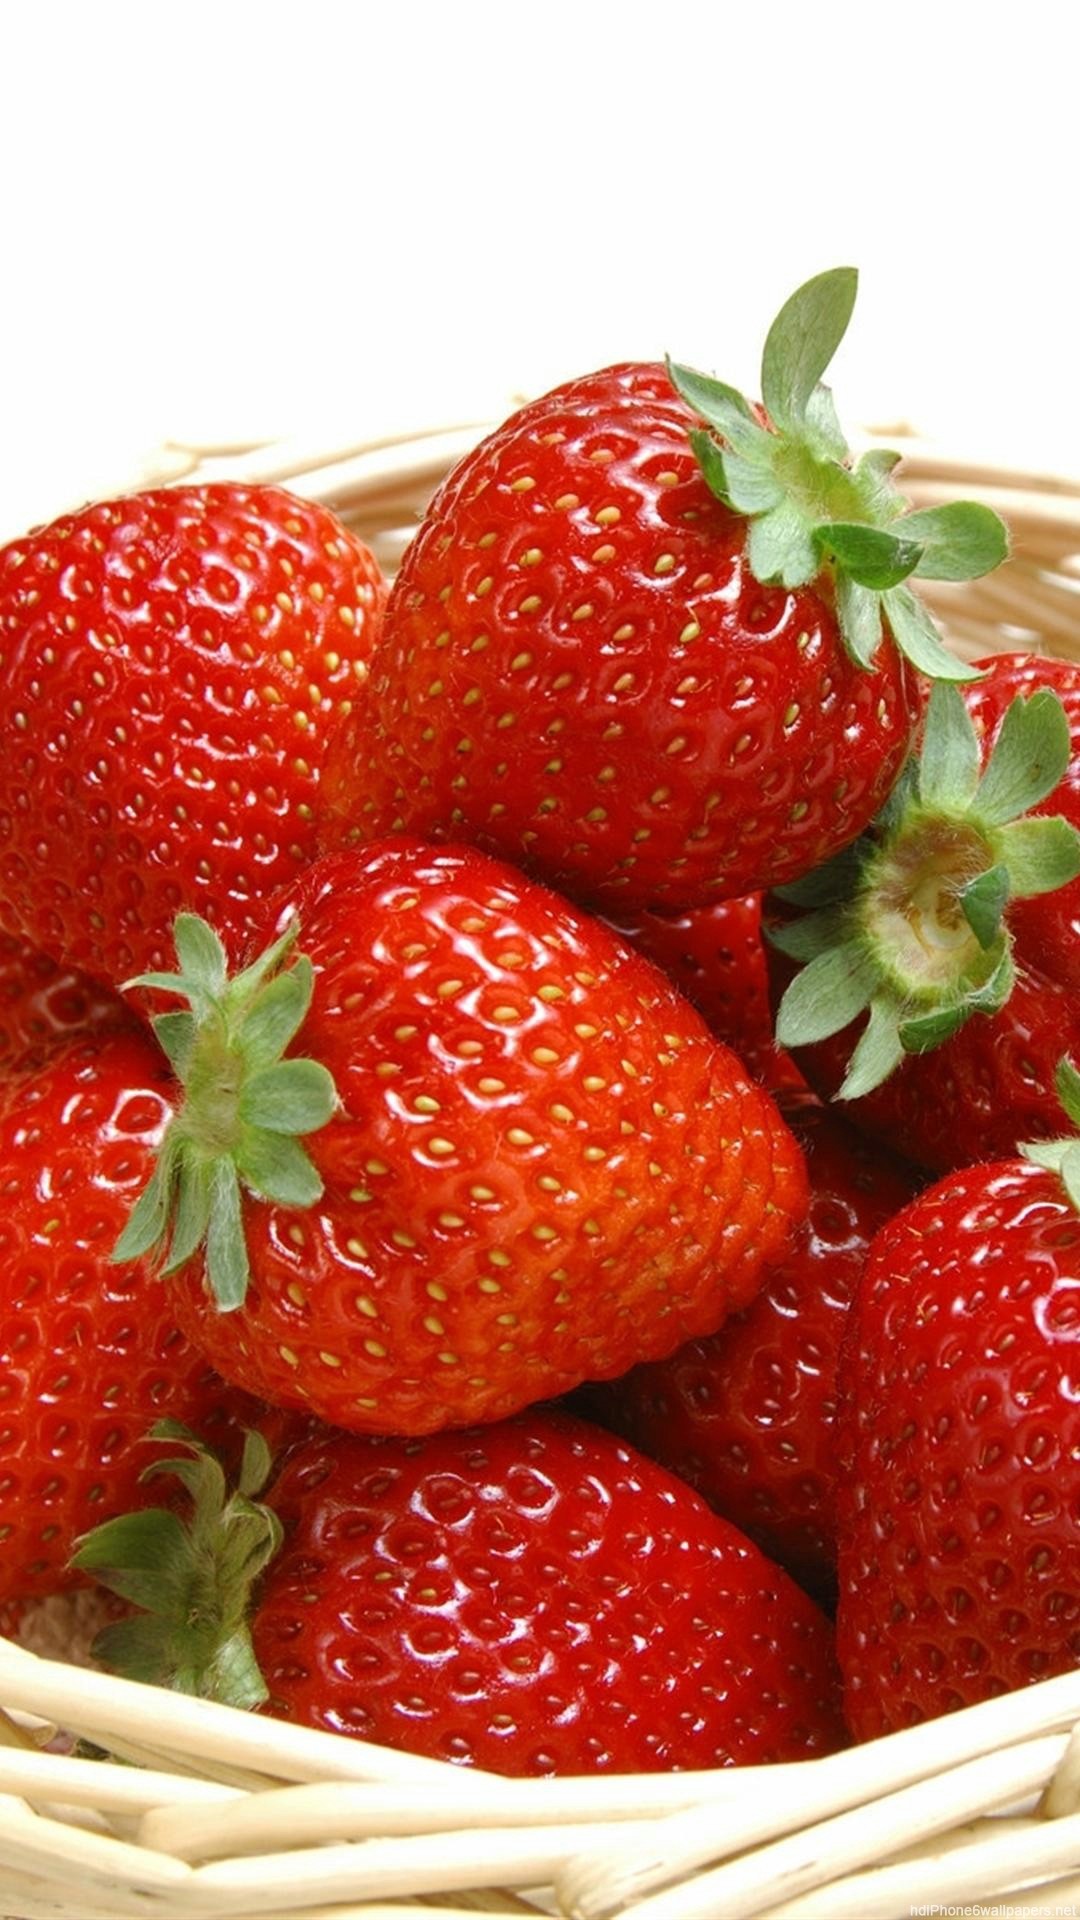 Strawberry Food Iphone 6 Wallpapers Hd - Basket Of Strawberries - 1080x1920  Wallpaper 